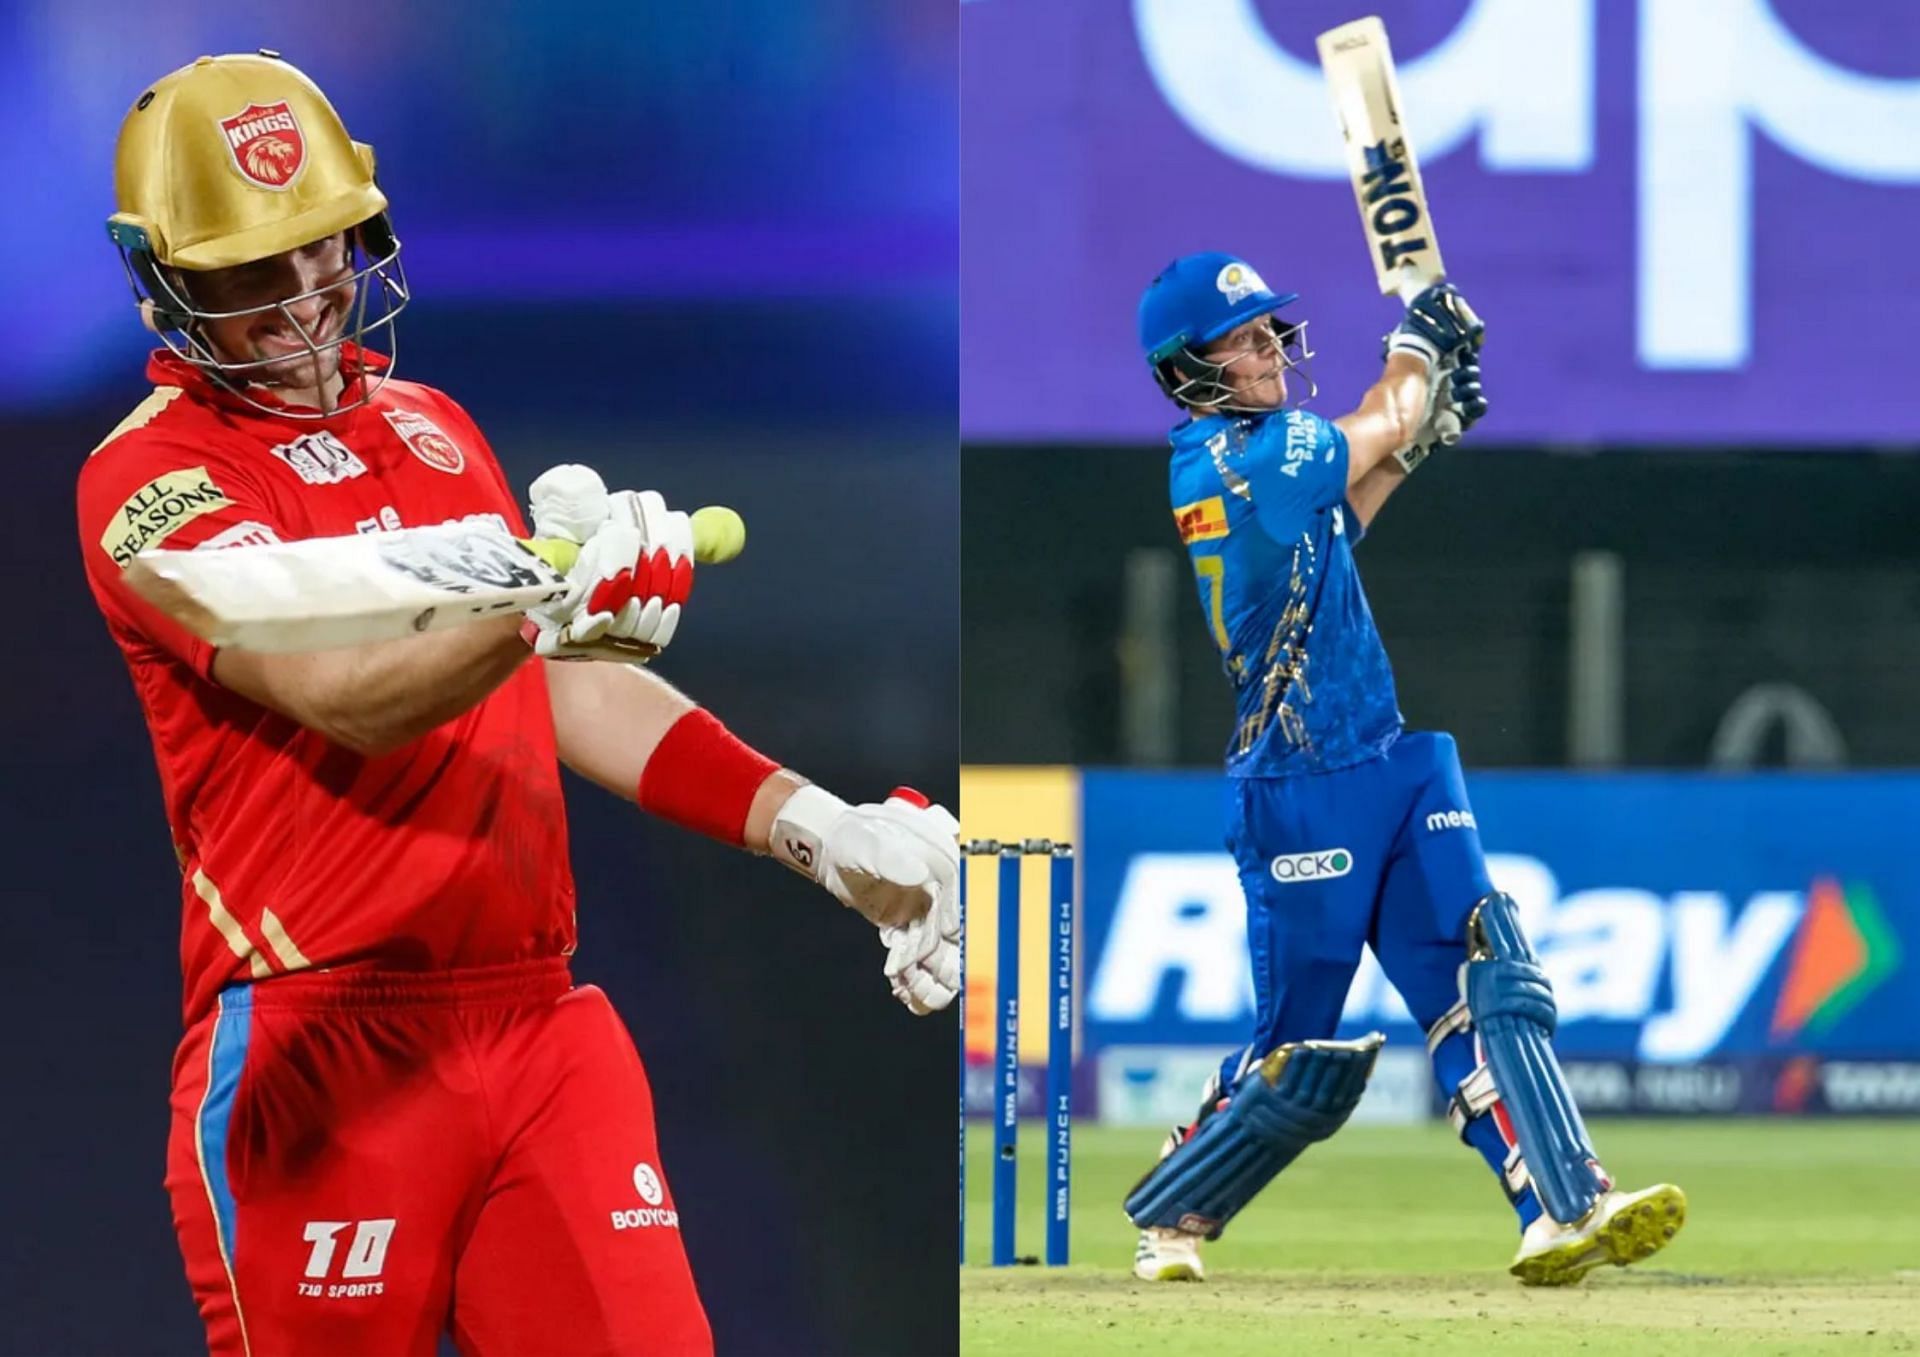 What do the distances on the five biggest hits of IPL 2022 thus far read? (Picture Credits: IPL).